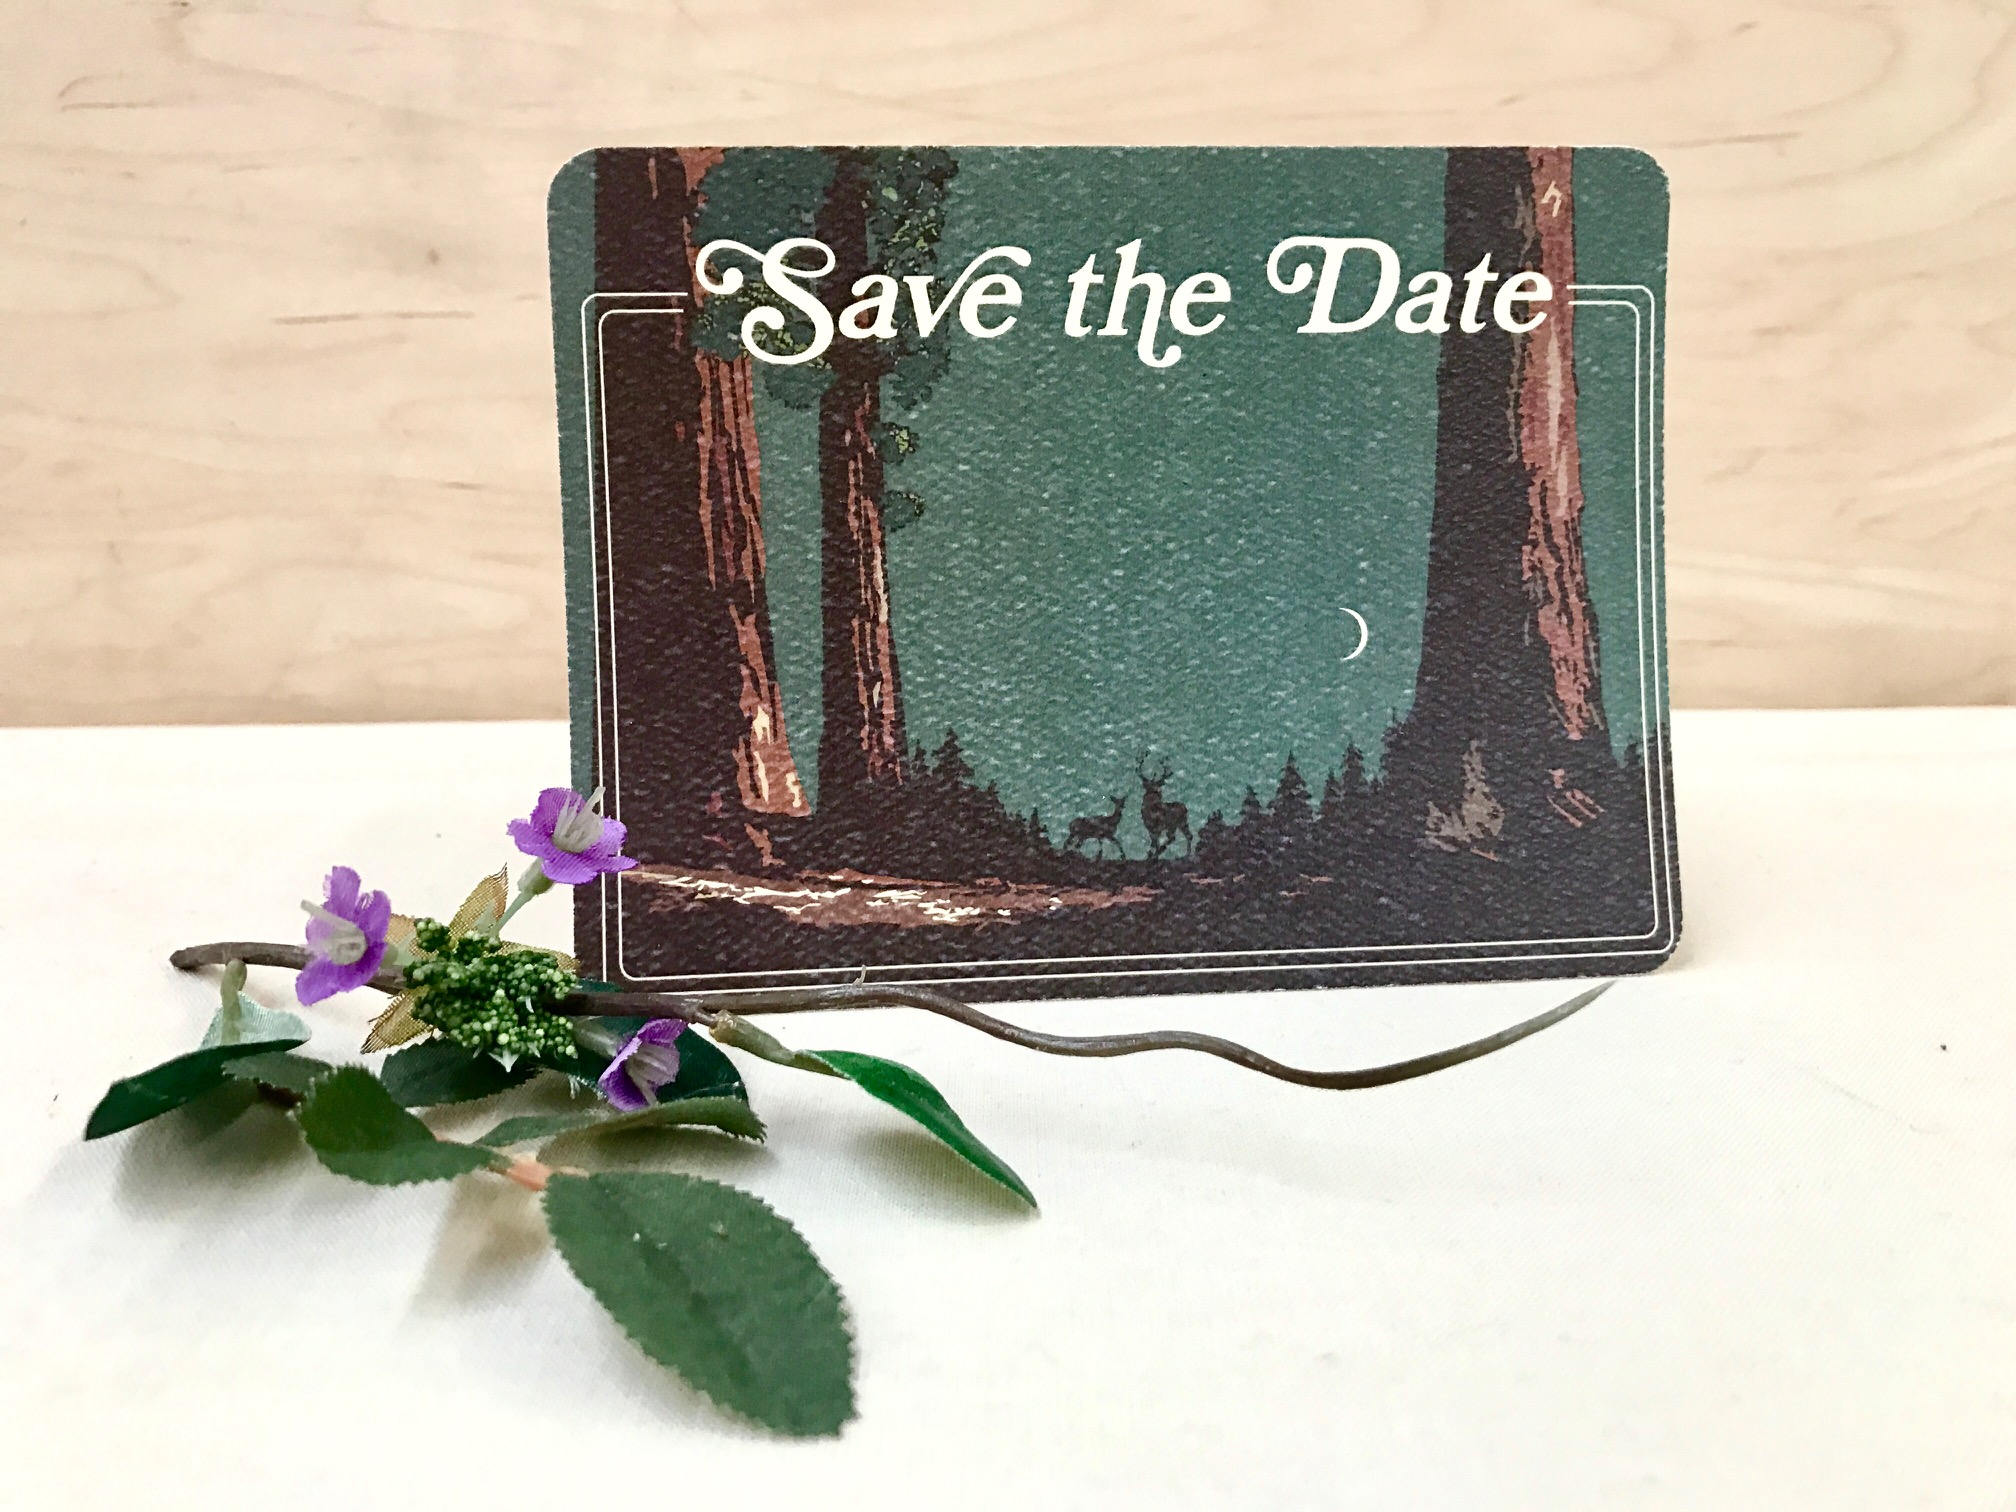 Sequoia National Park with Deer Save the Date Postcard // Rustic California Wedding Redwood Forest with Deer